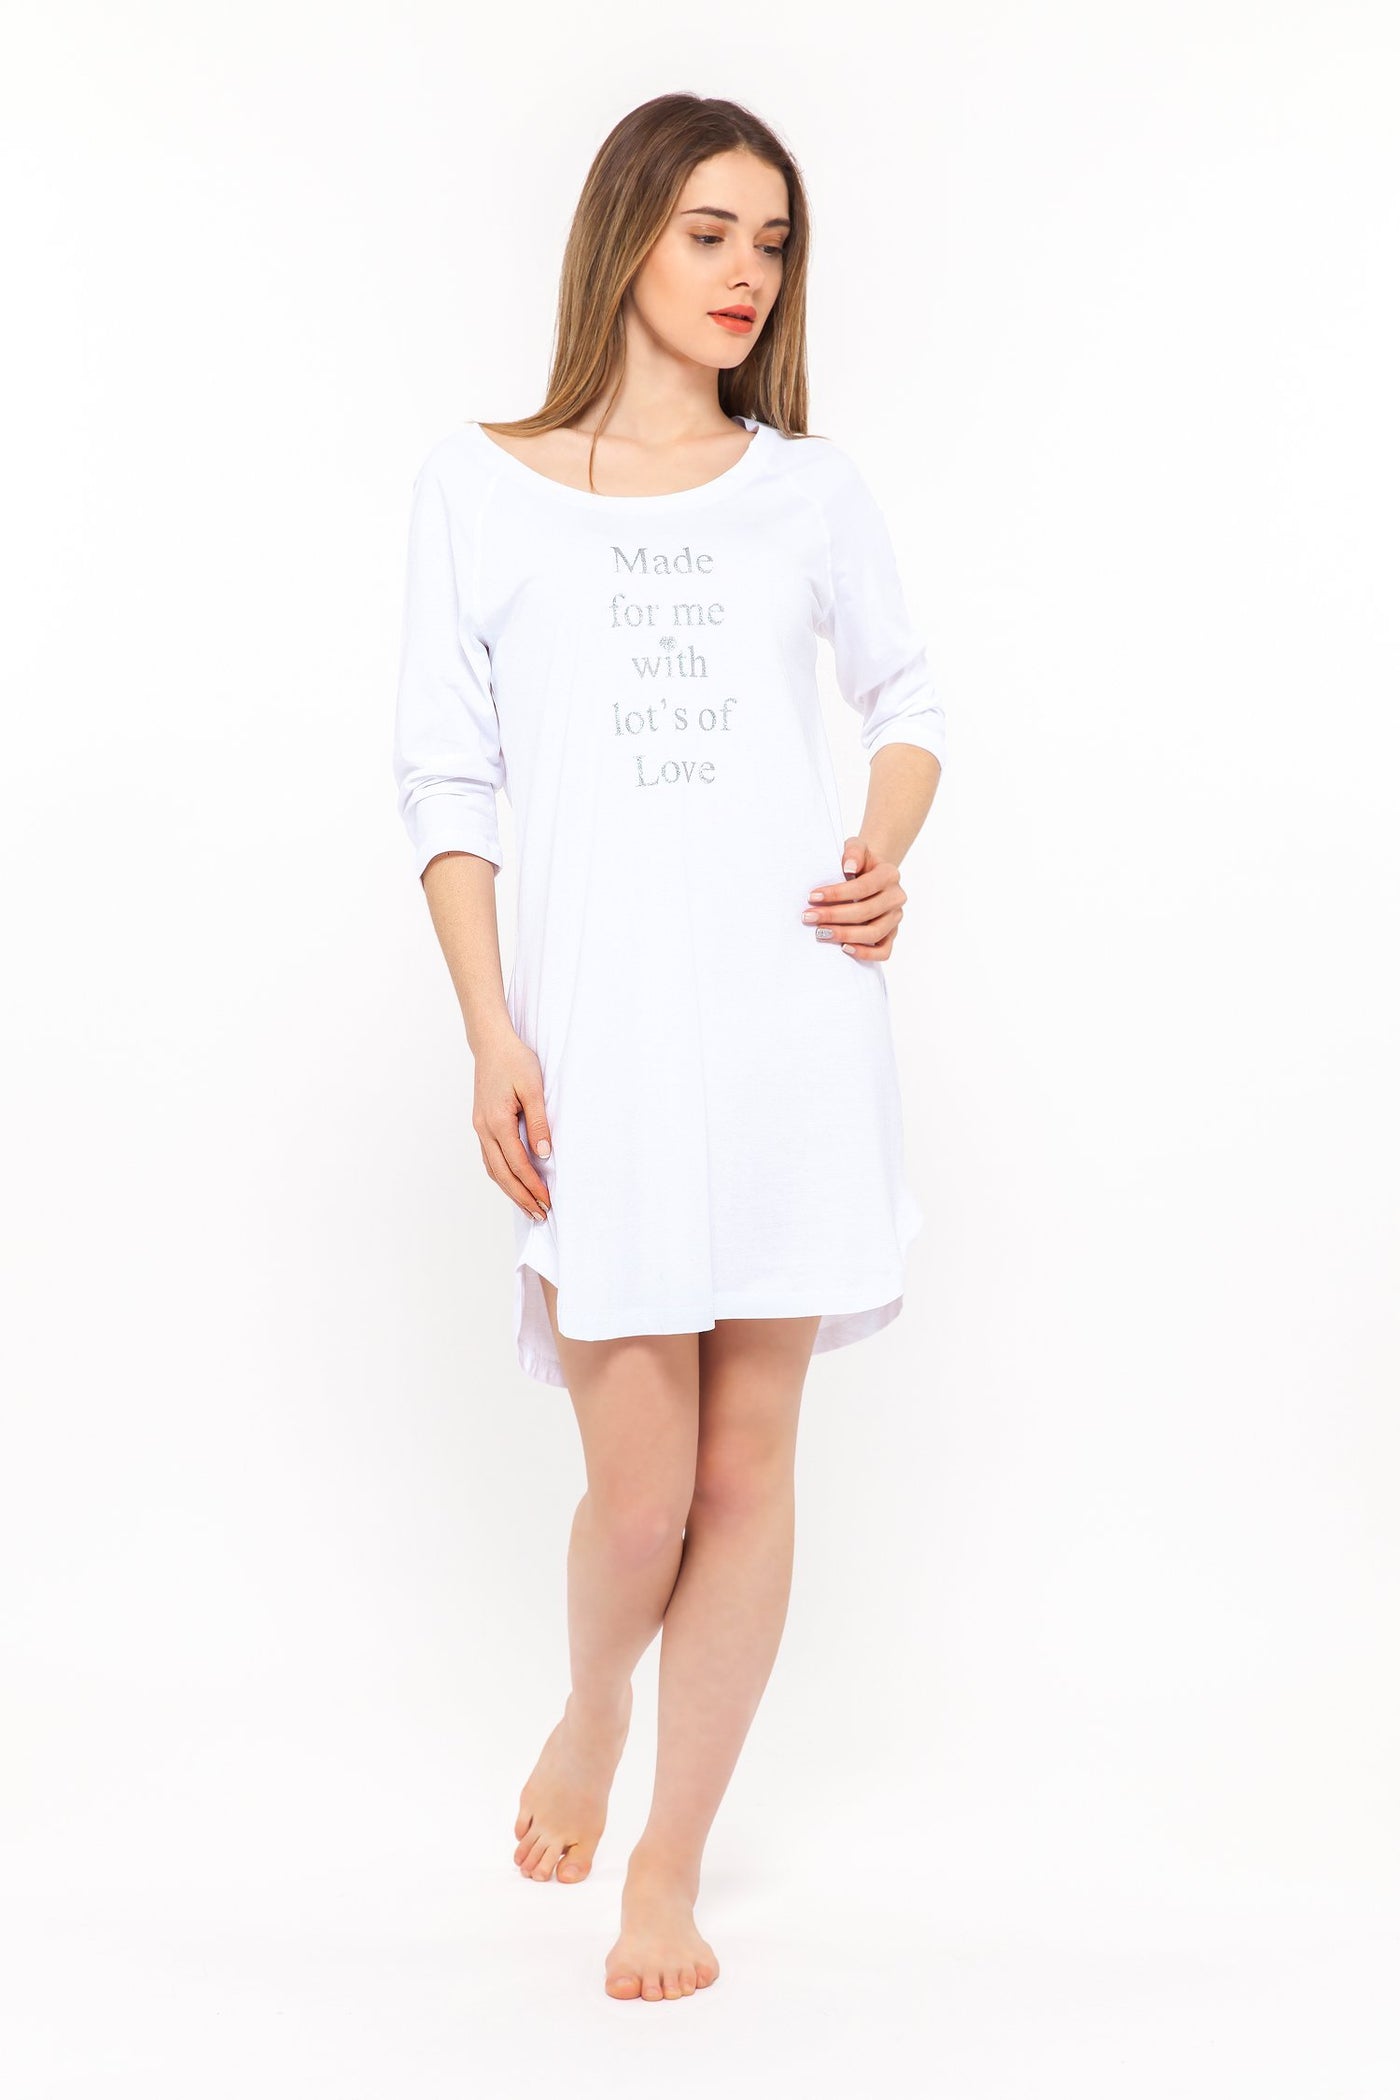 chassca 3/4 arm white nightdress - Breakmood